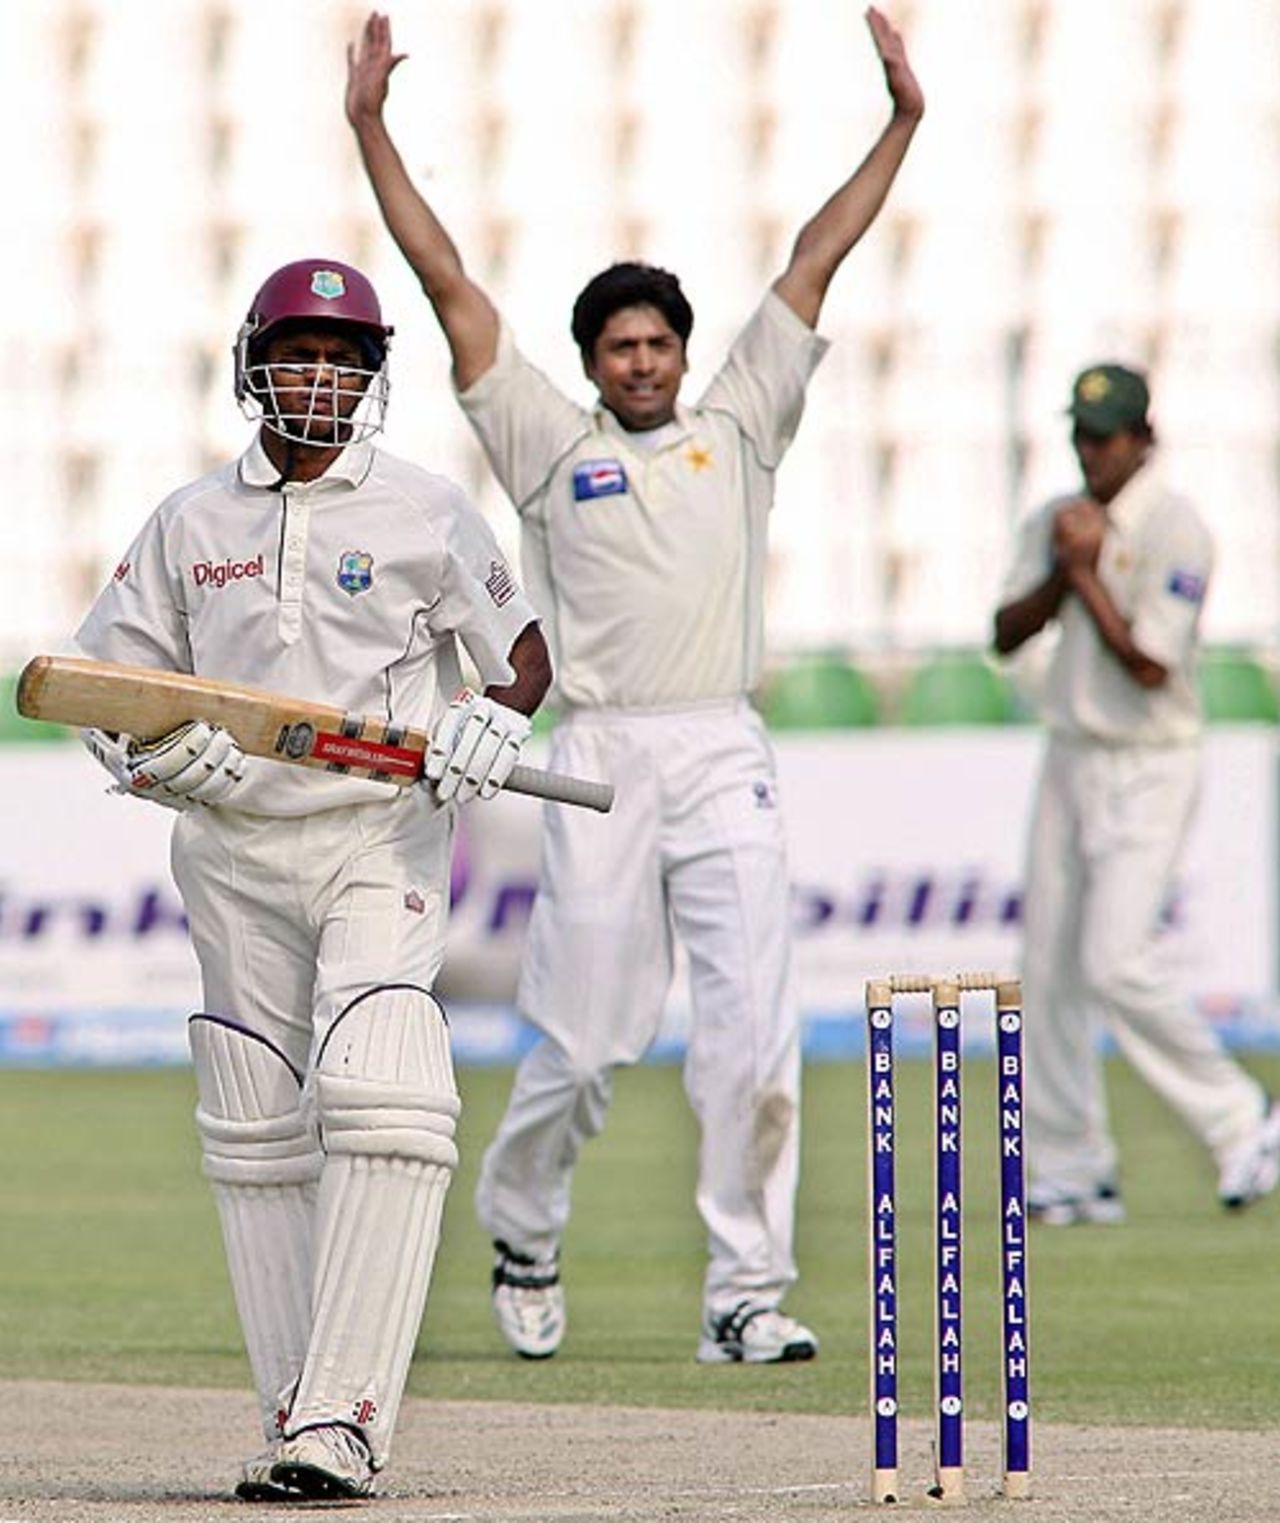 Shivnarine Chanderpaul leaves the field after being caught at mid-on off Shahid Nazir, Pakistan v West Indies, 2nd Test, Multan, November 21, 2006